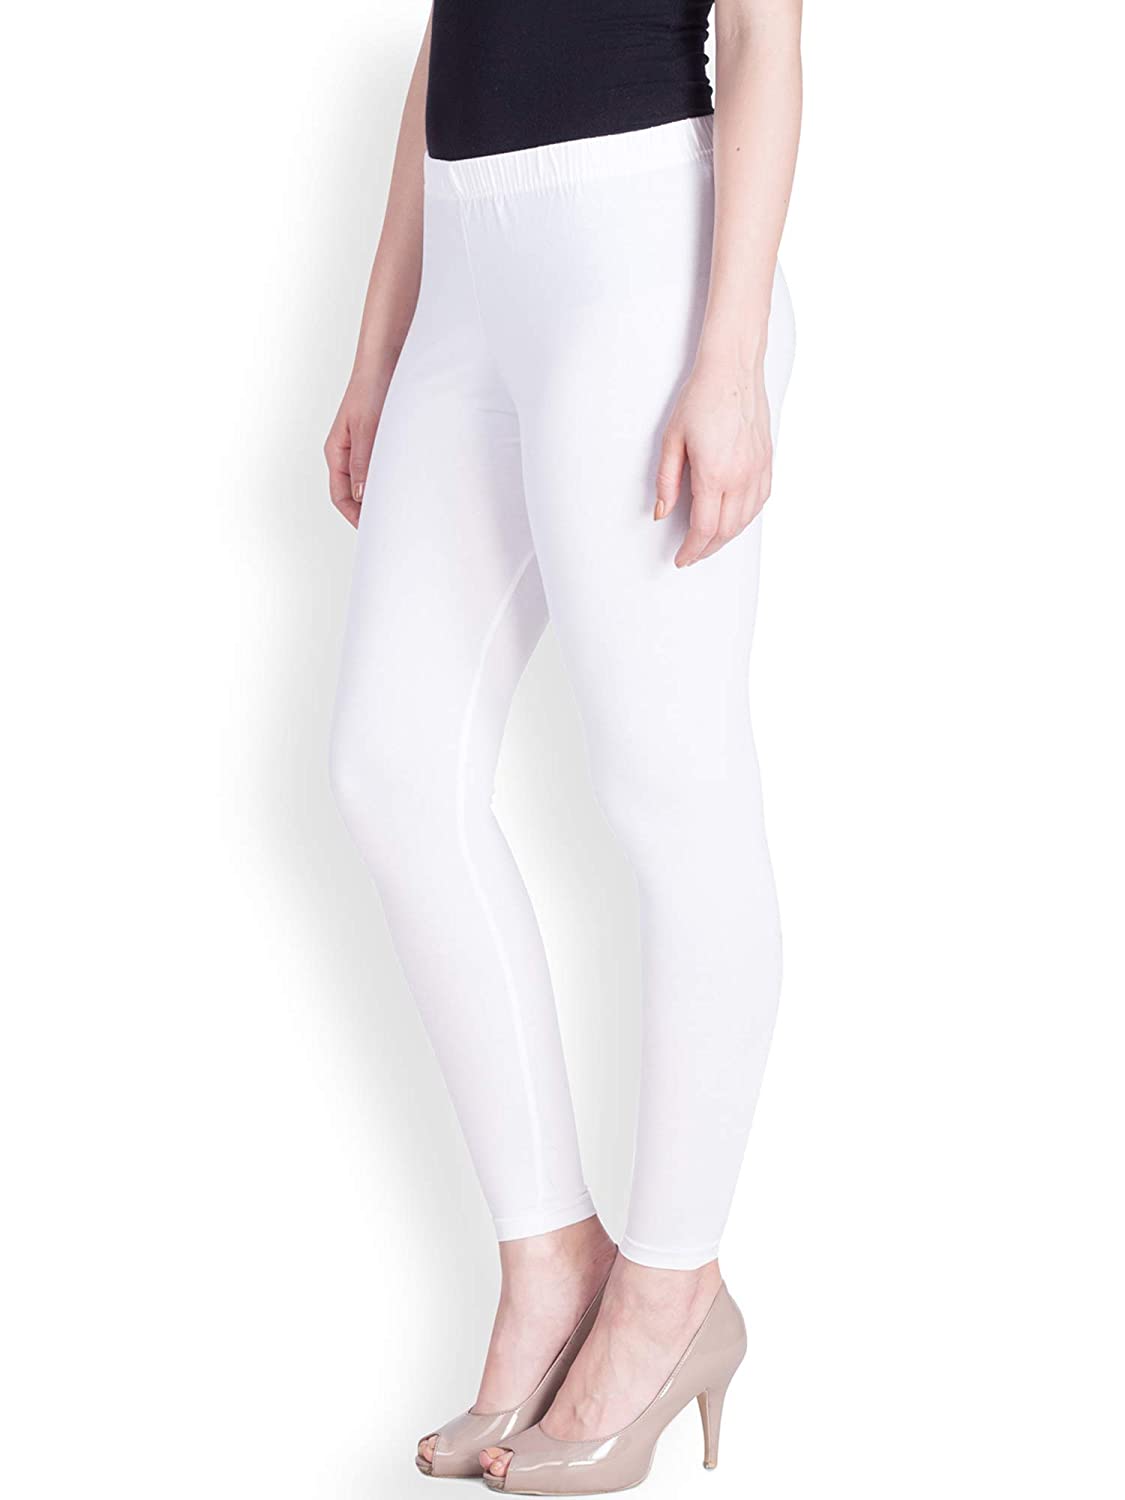 LUX LYRA Women's Cotton Indian Leggings - Pack of 3 (Off-White, Free Size)  at Amazon Women's Clothing store